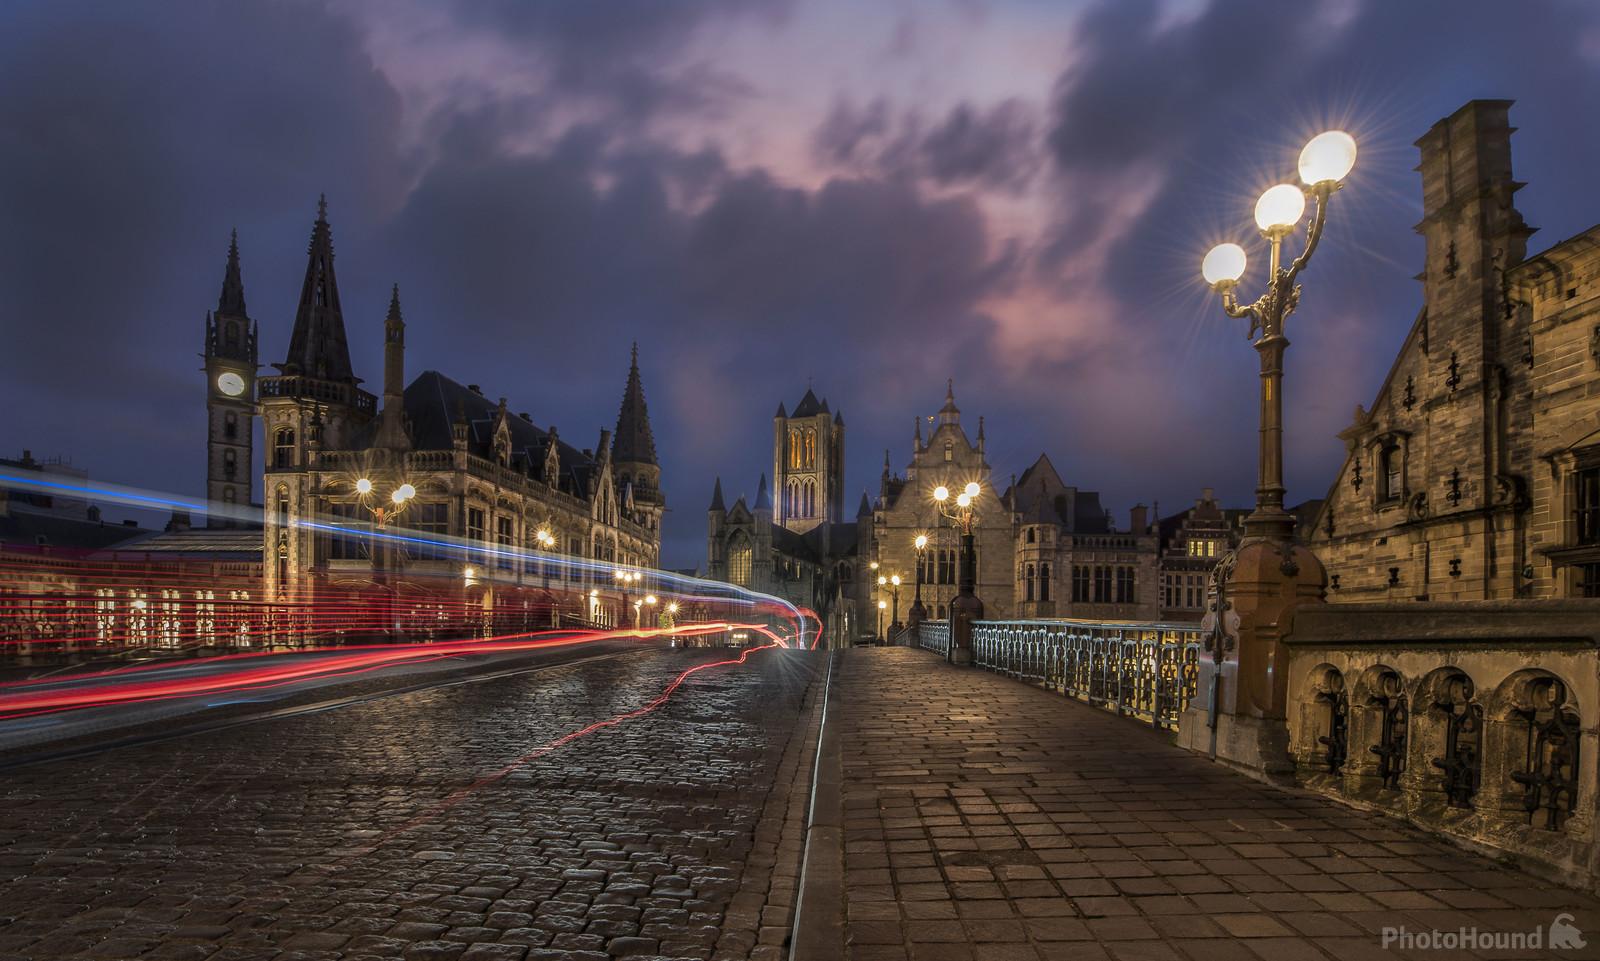 Image of St Michiels bridge Ghent by Rana Jabeen